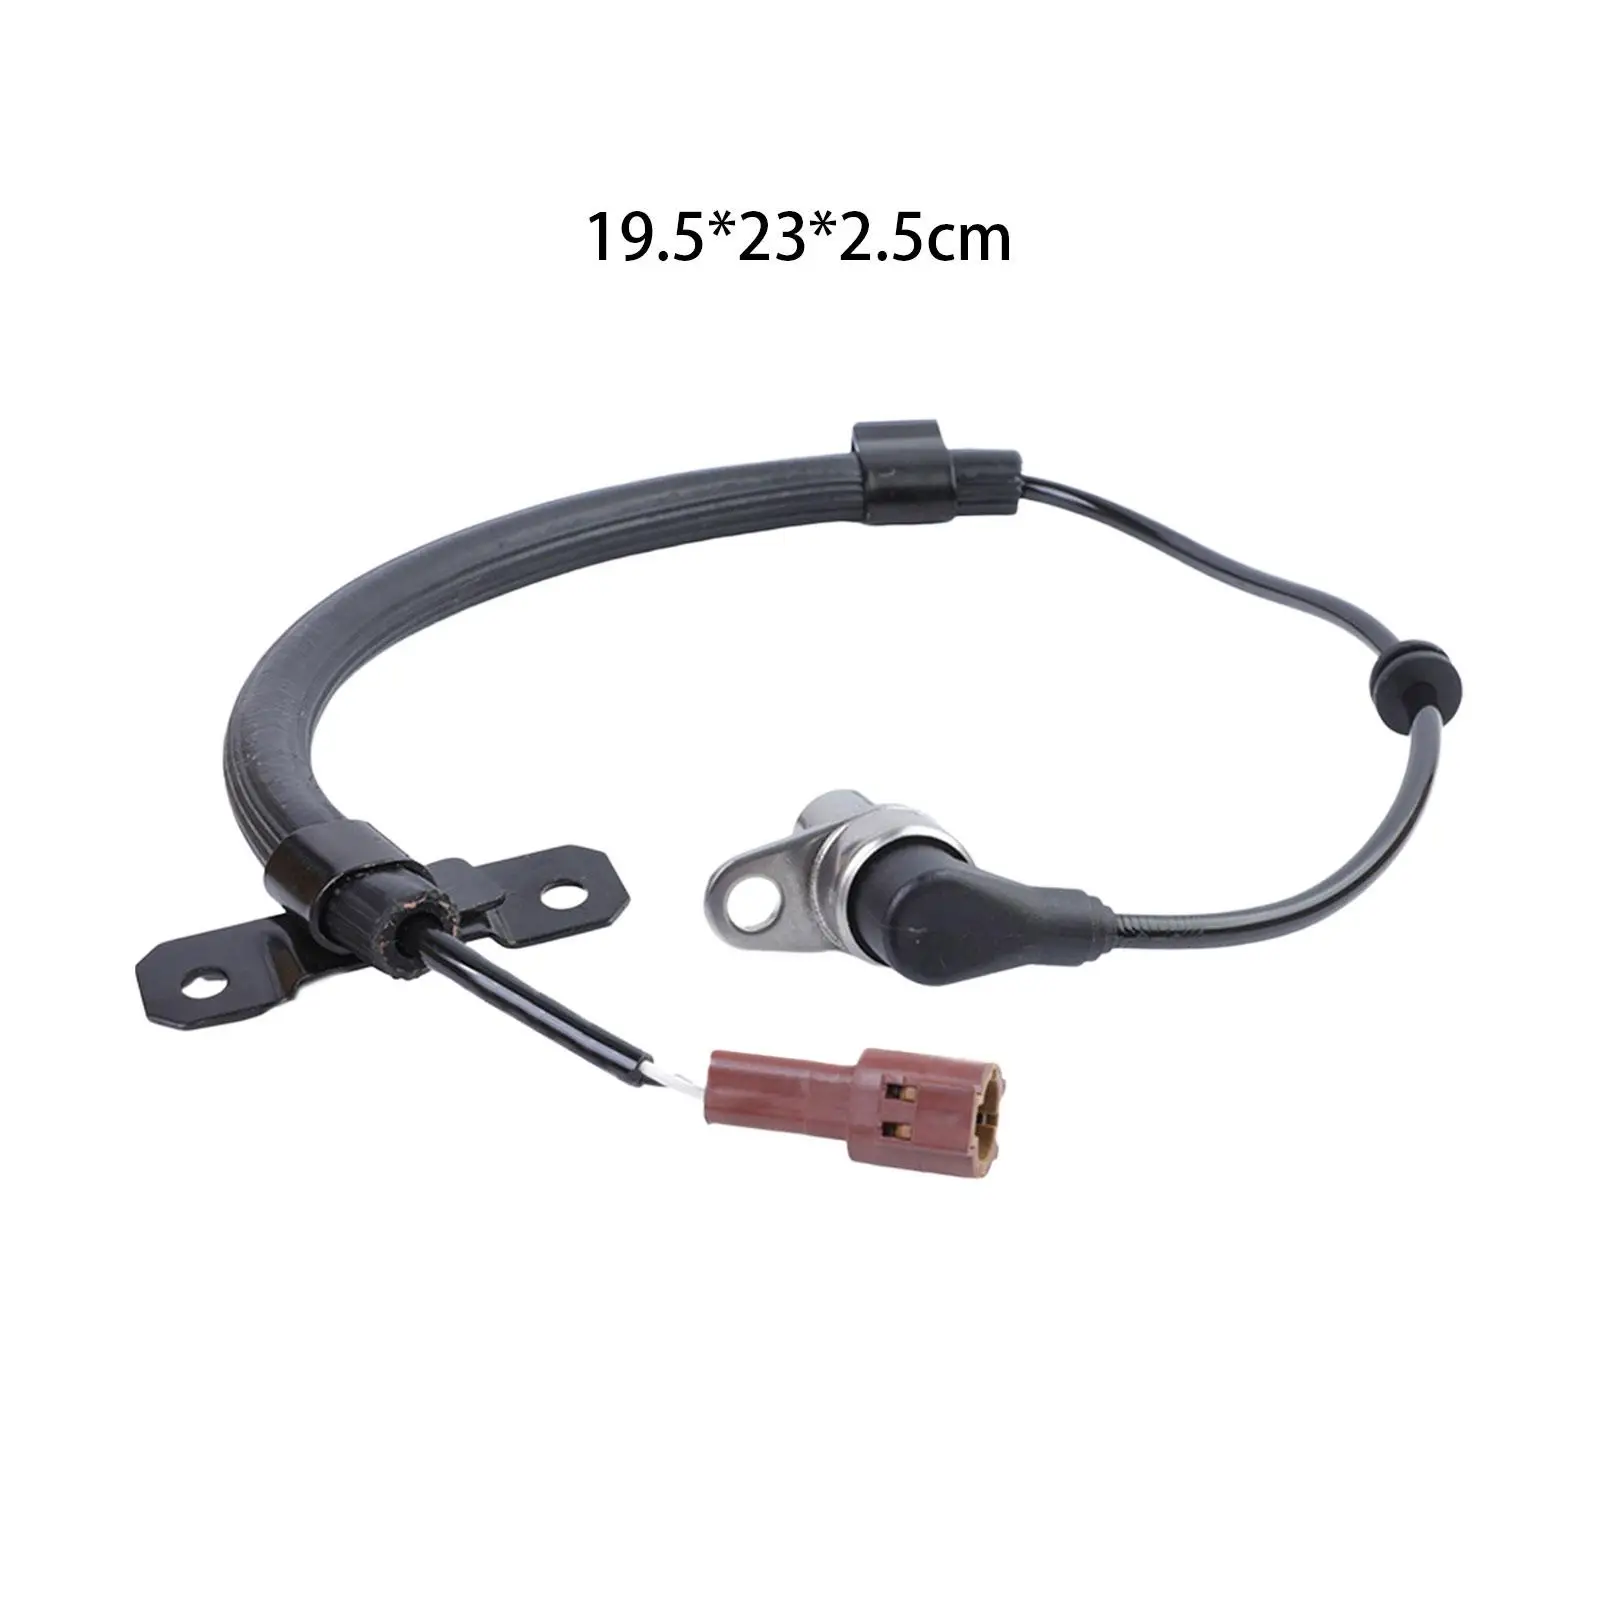 Replacement ABS Wheel Speed Sensor 479110-w000 Durable Replace for Pathfinder 1996-2000 Easily Install Vehicle Spare Parts